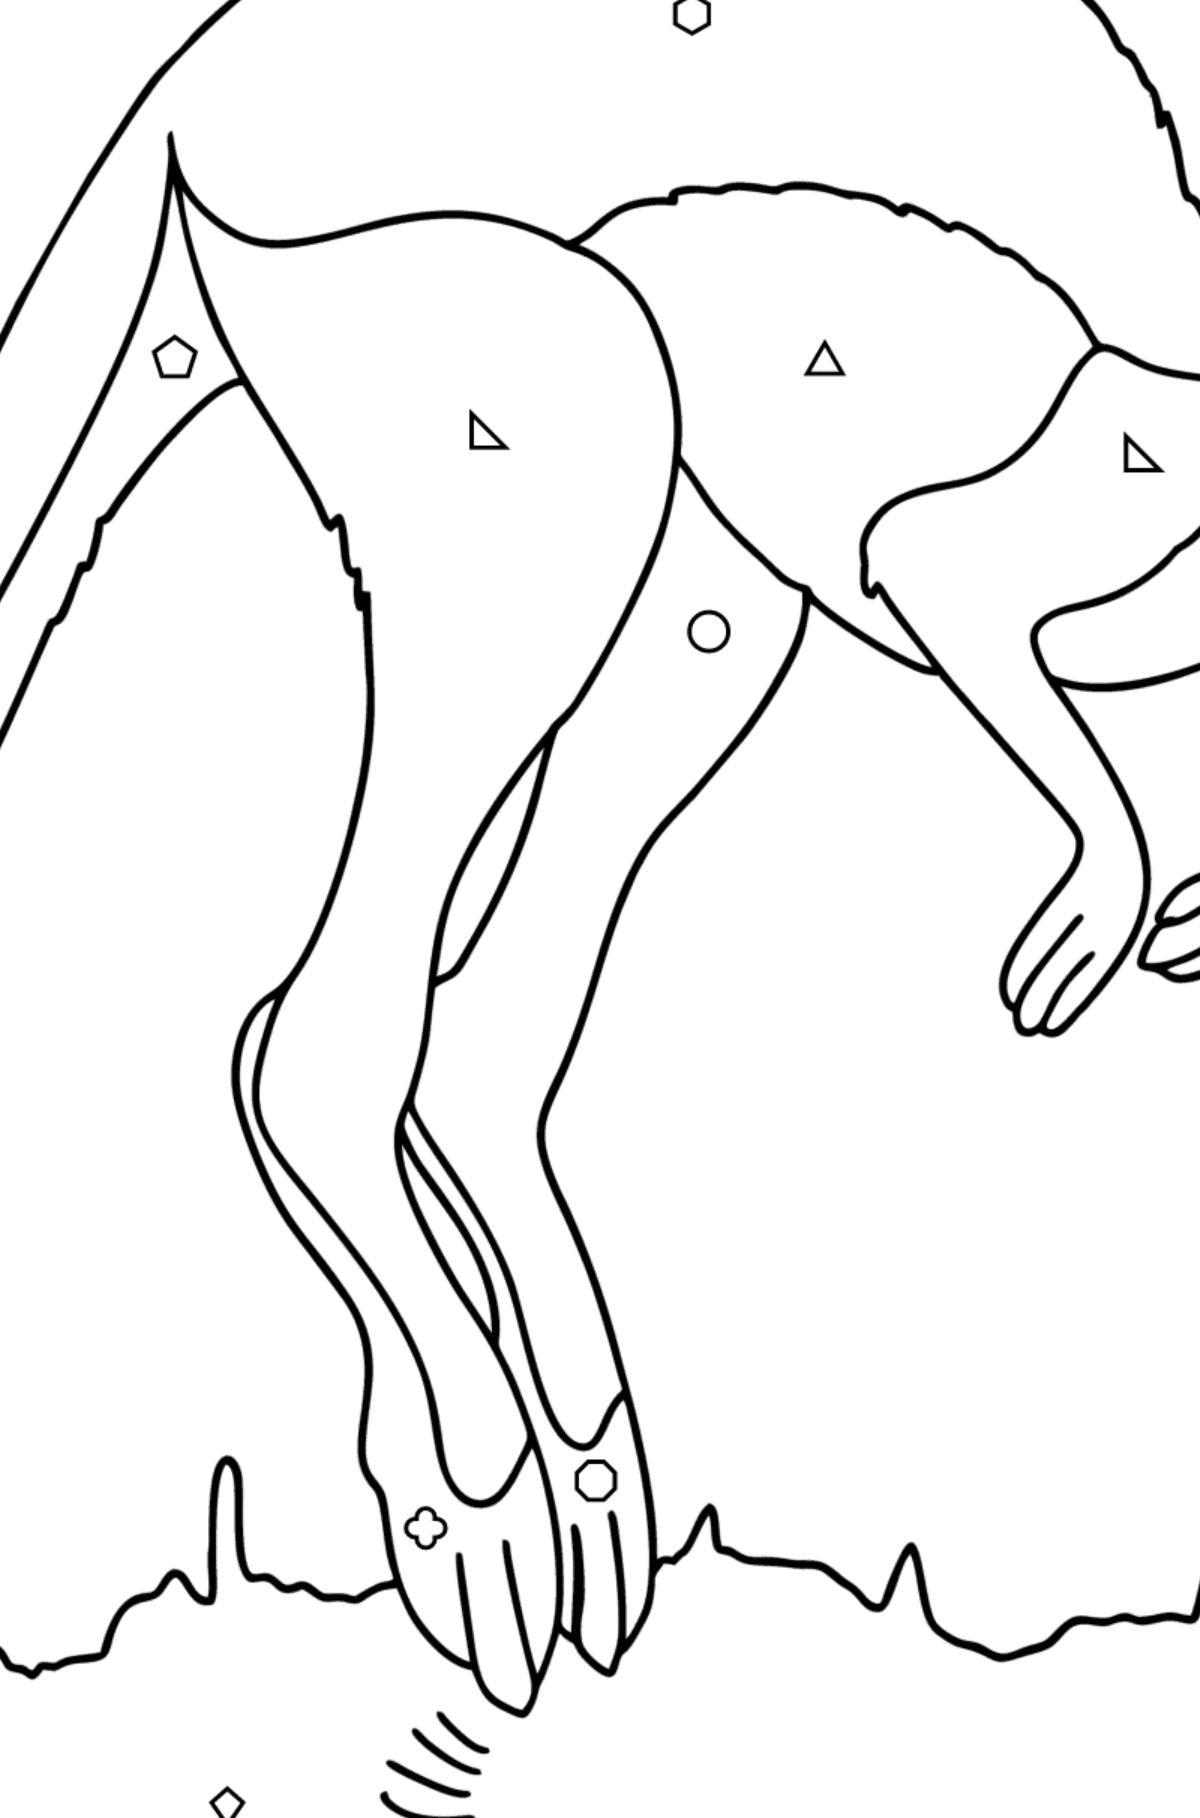 Jumping Kangaroo coloring page - Coloring by Geometric Shapes for Kids